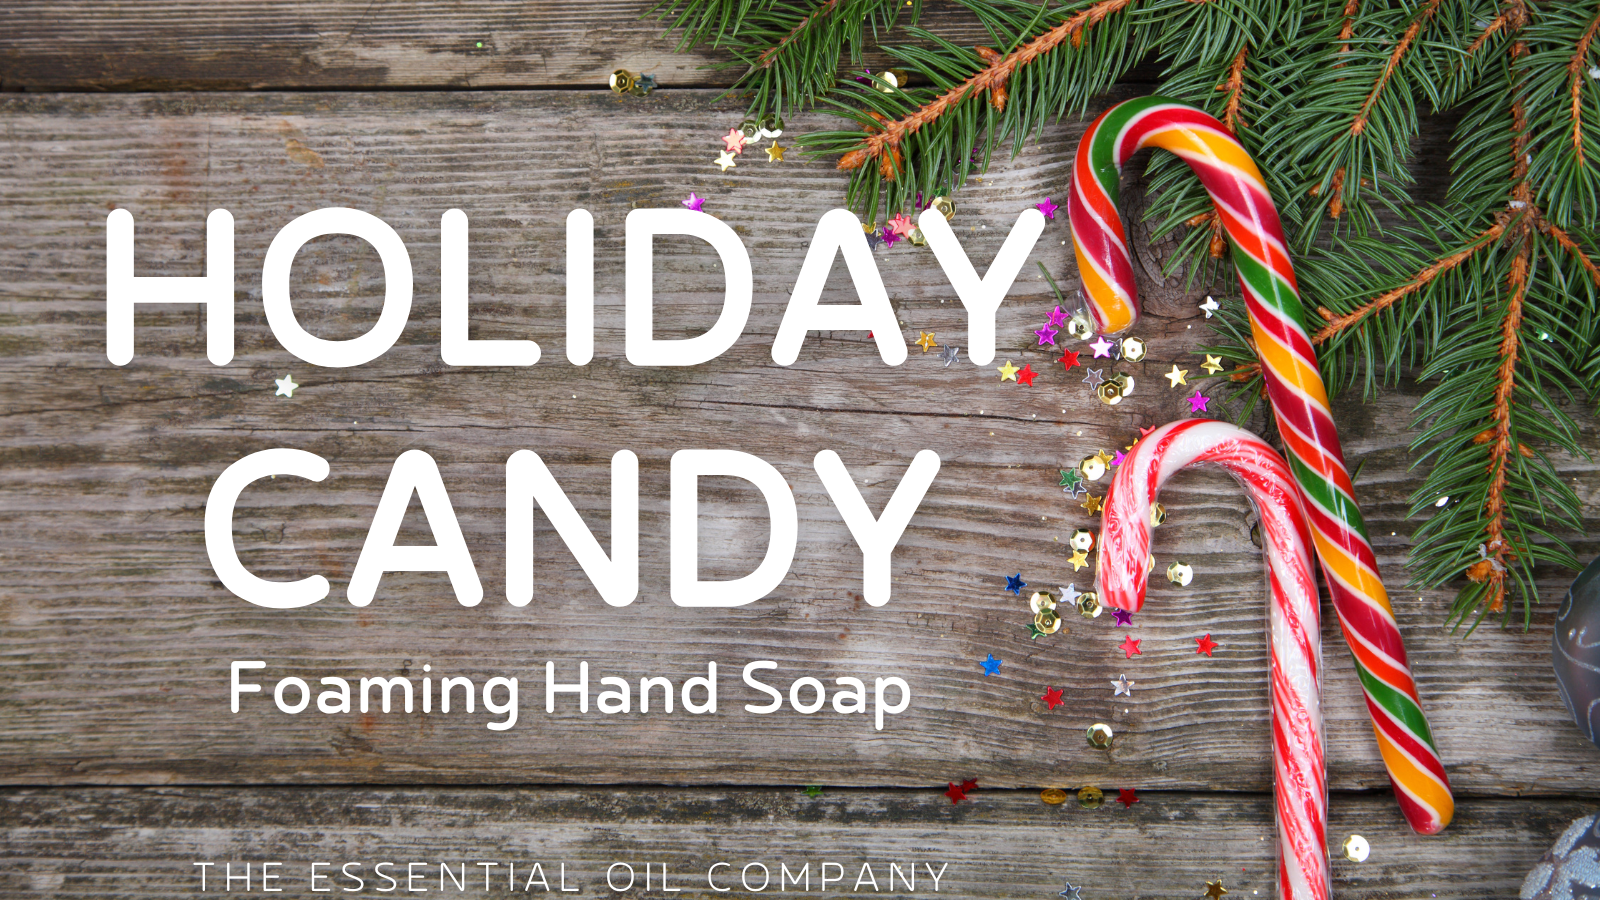 Holiday Candy Foaming Hand Soap